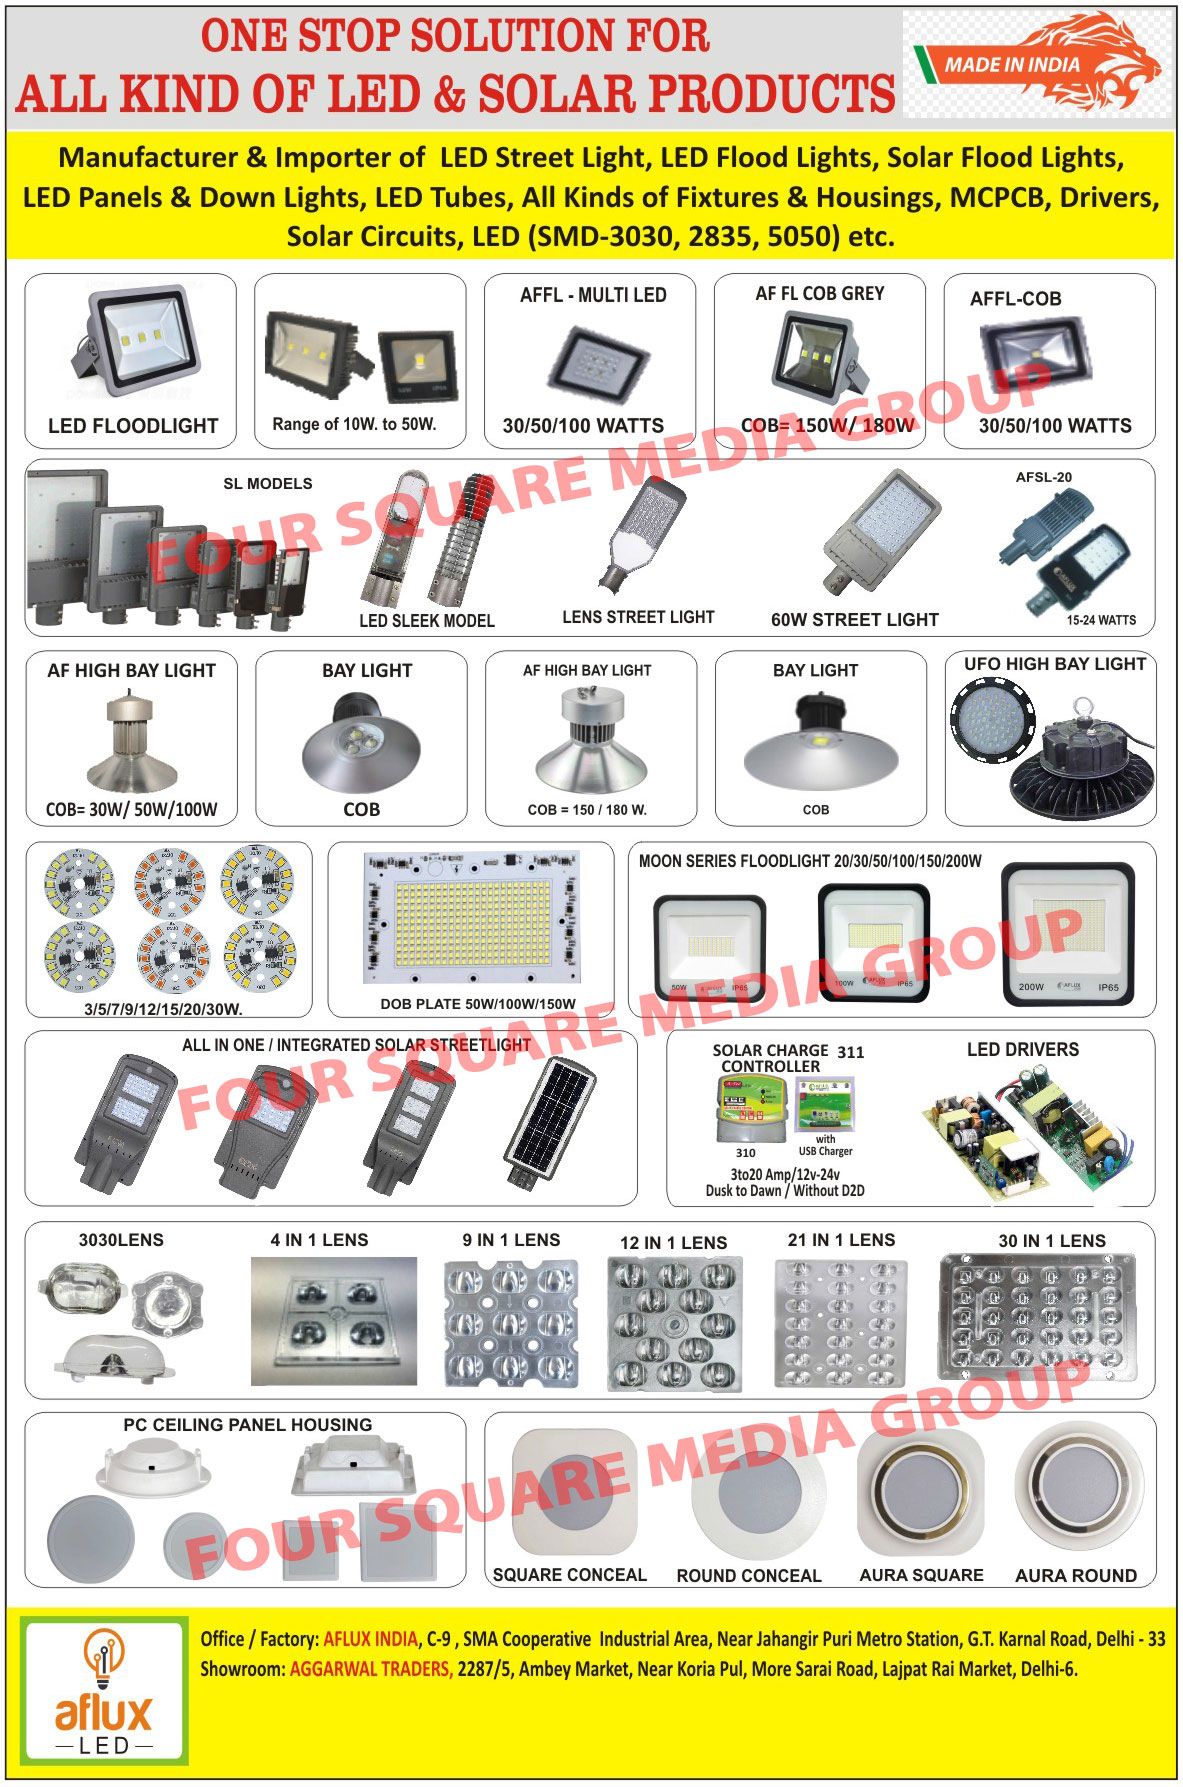 Led Lights, Led Cob Flood Lights, LED Bulbs, High Bay Lights, Led Home Lights, Led Tube Lights, Solo Round Lights, Solo Square Lights, Solar Street Lights, Solar Flood Lights, Solar Home Light Systems, Solar Lanterns, Solar Charge Controllers, Nylon Battery Boxes, Solar Home Lights, MCPCB, DC wires, DC Sockets, Bulb Holders, Punching Machines, Mount Ceiling Lights, Led Drivers, Led Tunnel Light Housings, Cob Led Flood Light Housings, Flood Lights, Solar Led Street Lights, Led Down Lights, DC Lights, Led Lanterns, USB Chargers, Led Bulb Drivers, Led Flower Light Lens, Led Fixtures, Led Light Housings, Solar Circuits, SMD Leds, Led Tunnel Lights, AC Led Modules, Led AC Modules, Led Light MCPCB, Solar AC Circuits, Led Flood Lights, Integrated Solar Led Street Lights, Led Round Lens, Led Lens, Batwing Lens, DOB Color Leds, Conceal Lights, 270 Degree Bulb Housings, PC Ceiling Panel Housing, DOB Plate